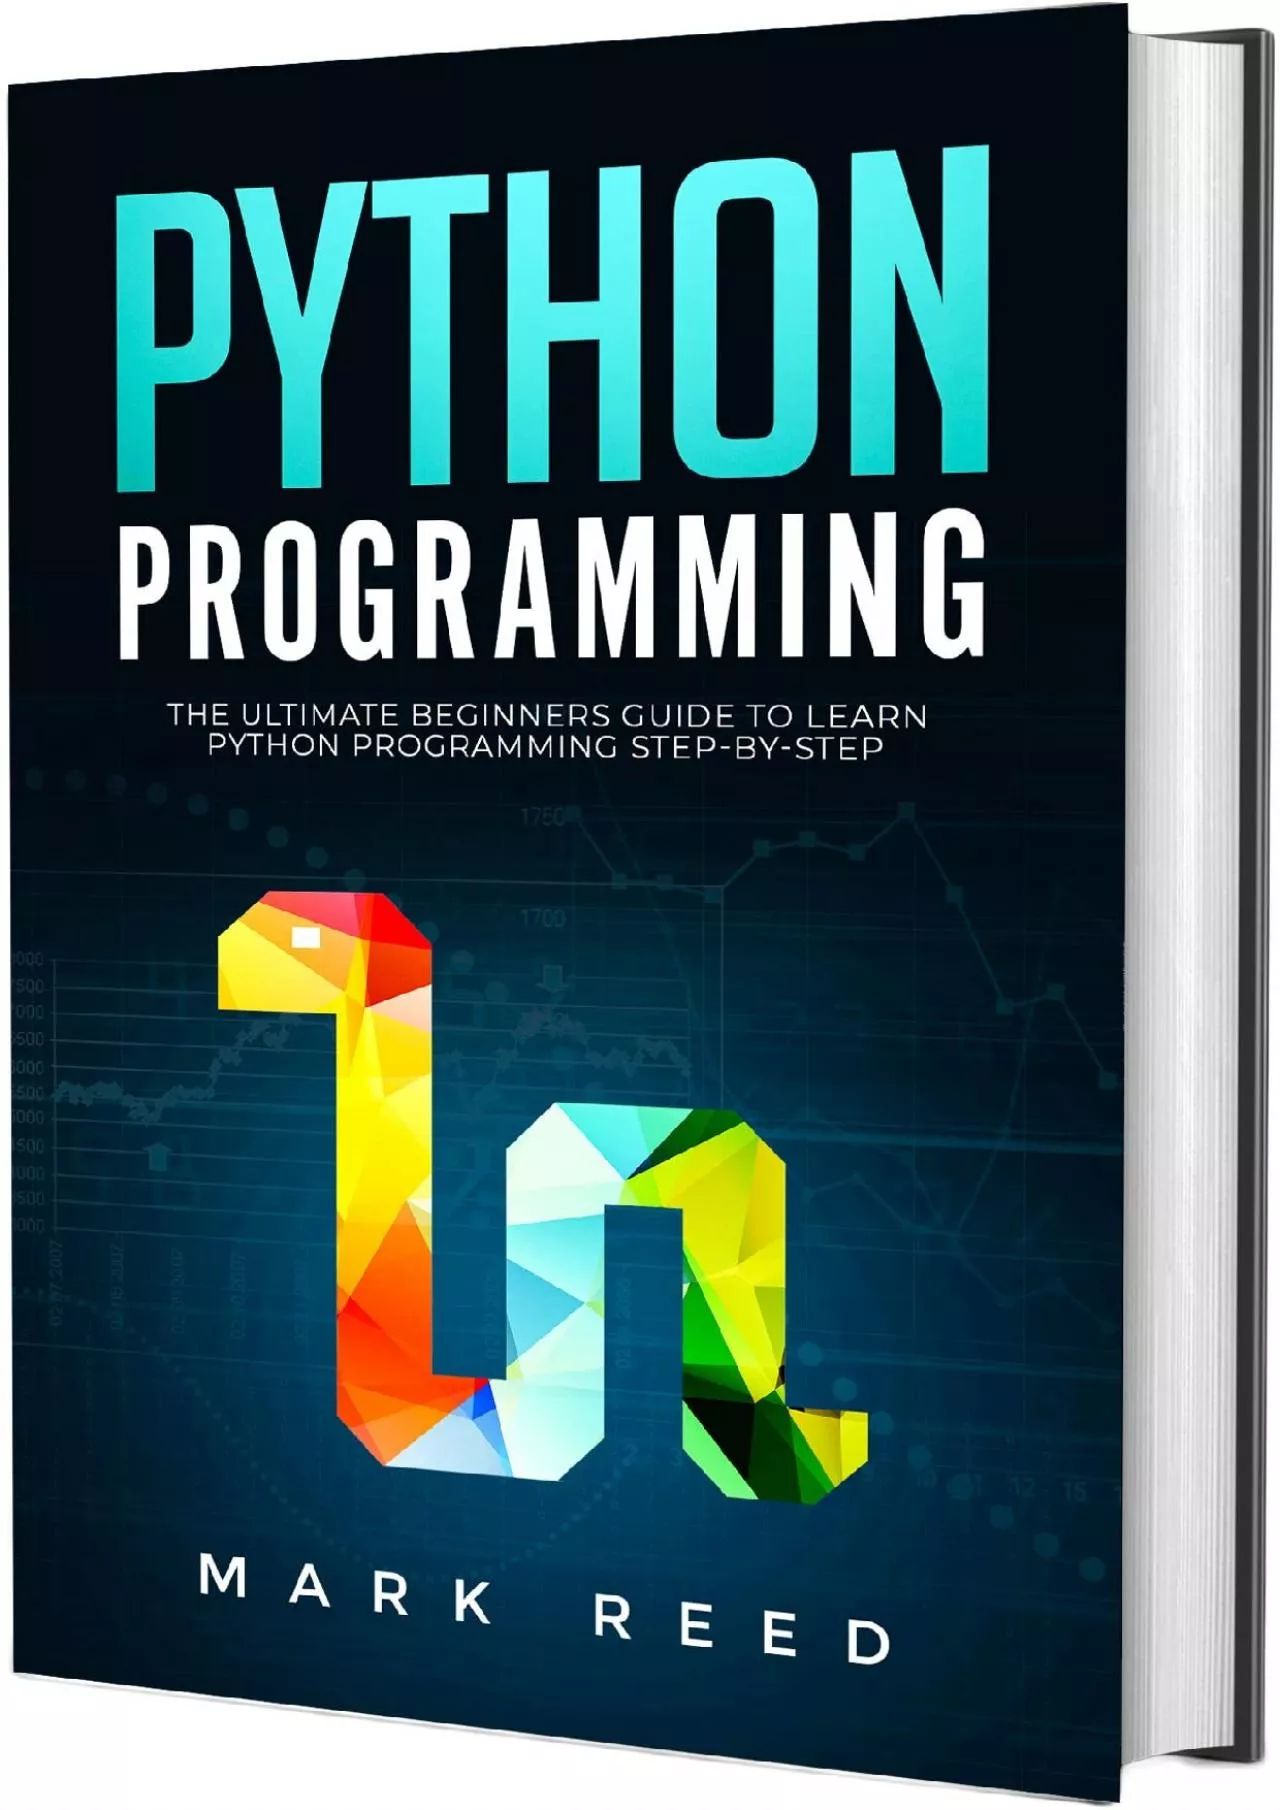 [BEST]-Python Programming: The Ultimate Beginners Guide to Learn Python Programming Step-by-Step